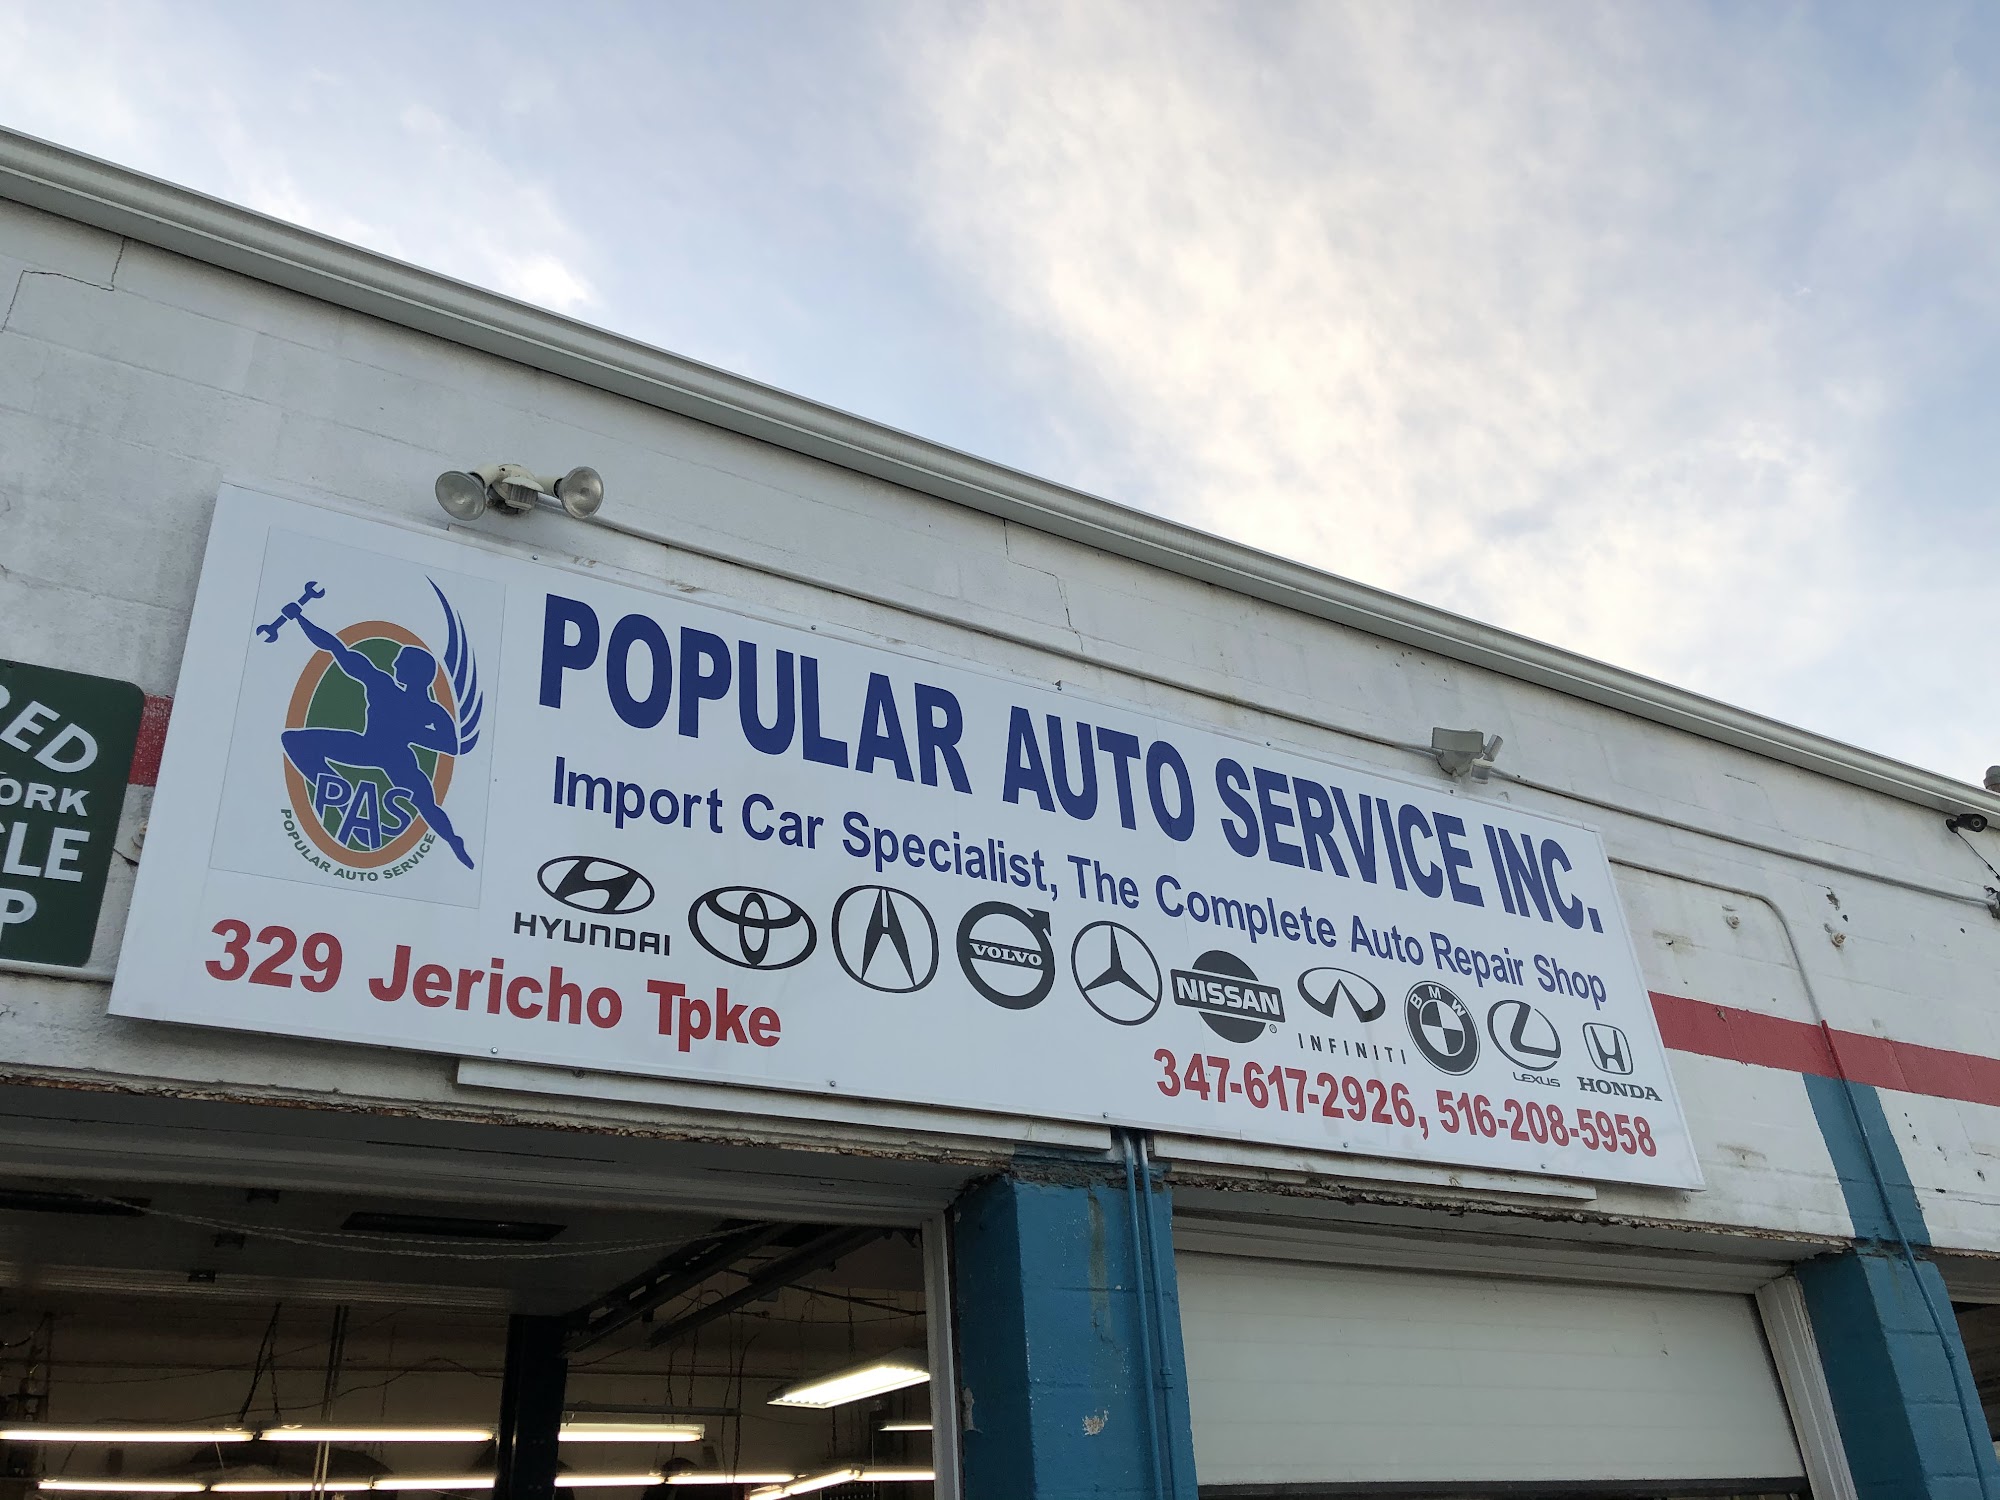 Popular Auto Services 329 Jericho Turnpike Rear, Floral Park New York 11001